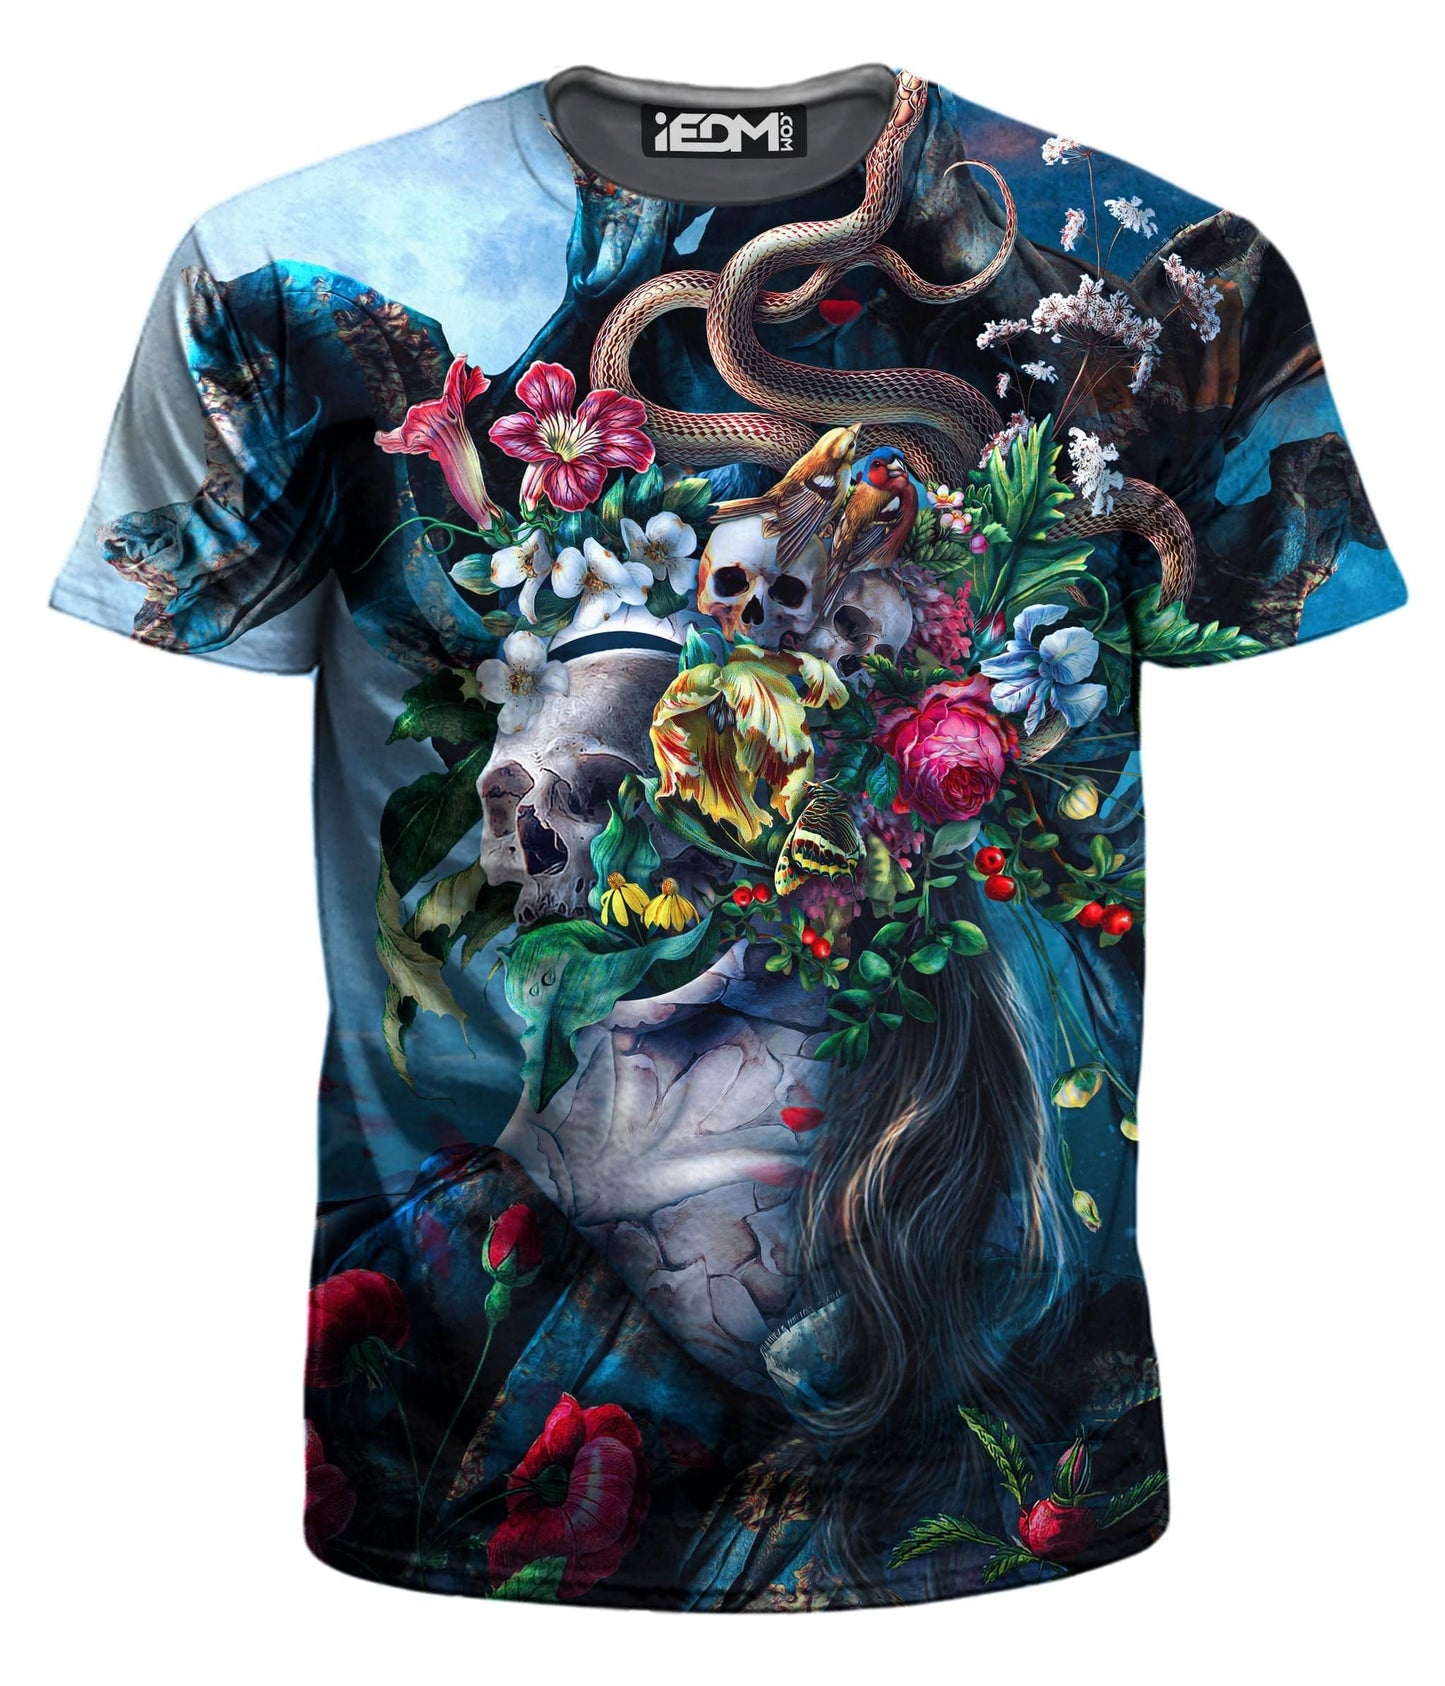 Live and Die T-Shirt and Shorts Combo, Riza Peker, | iEDM